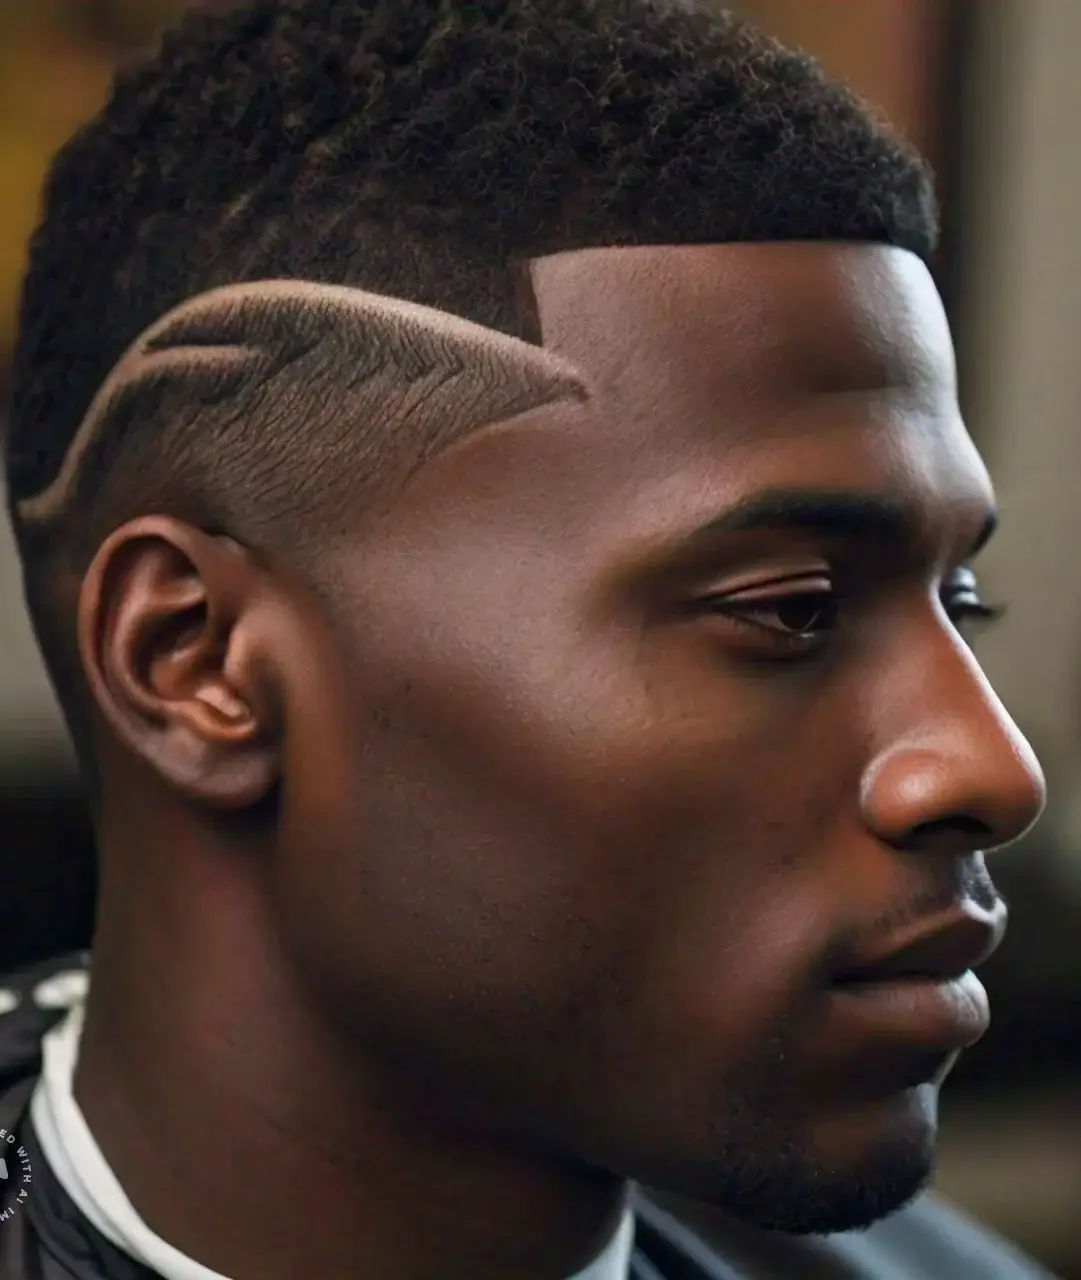 Black man with fade haircut and side part.